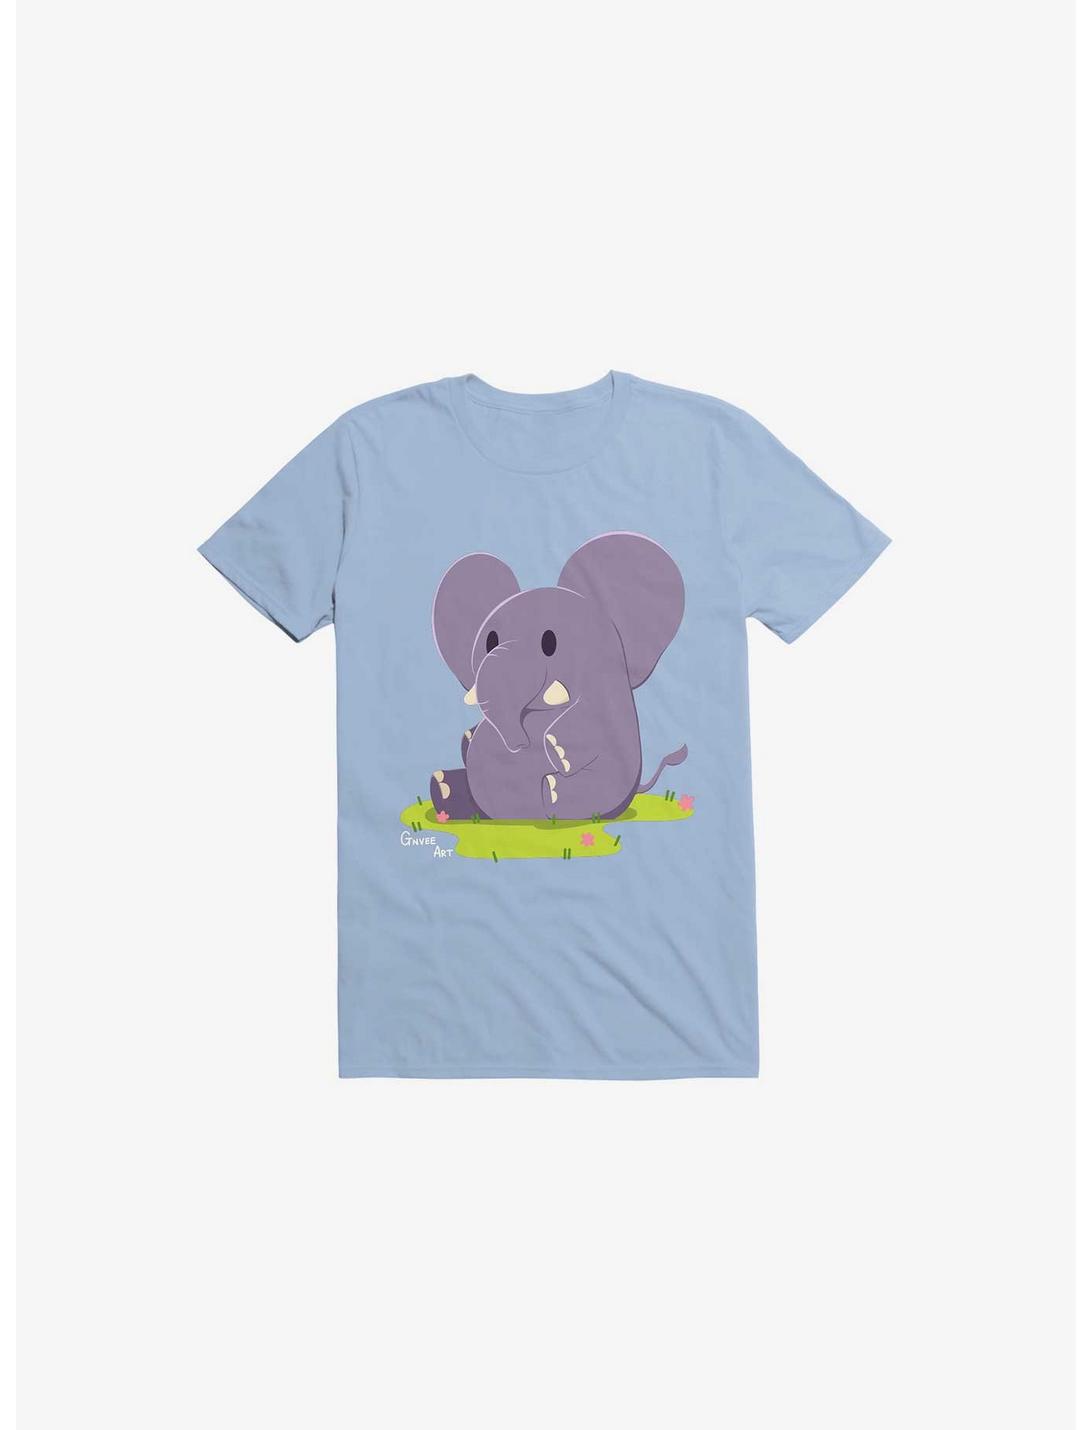 Kawaii Excuse the Elephant in the Room T-Shirt, LIGHT BLUE, hi-res